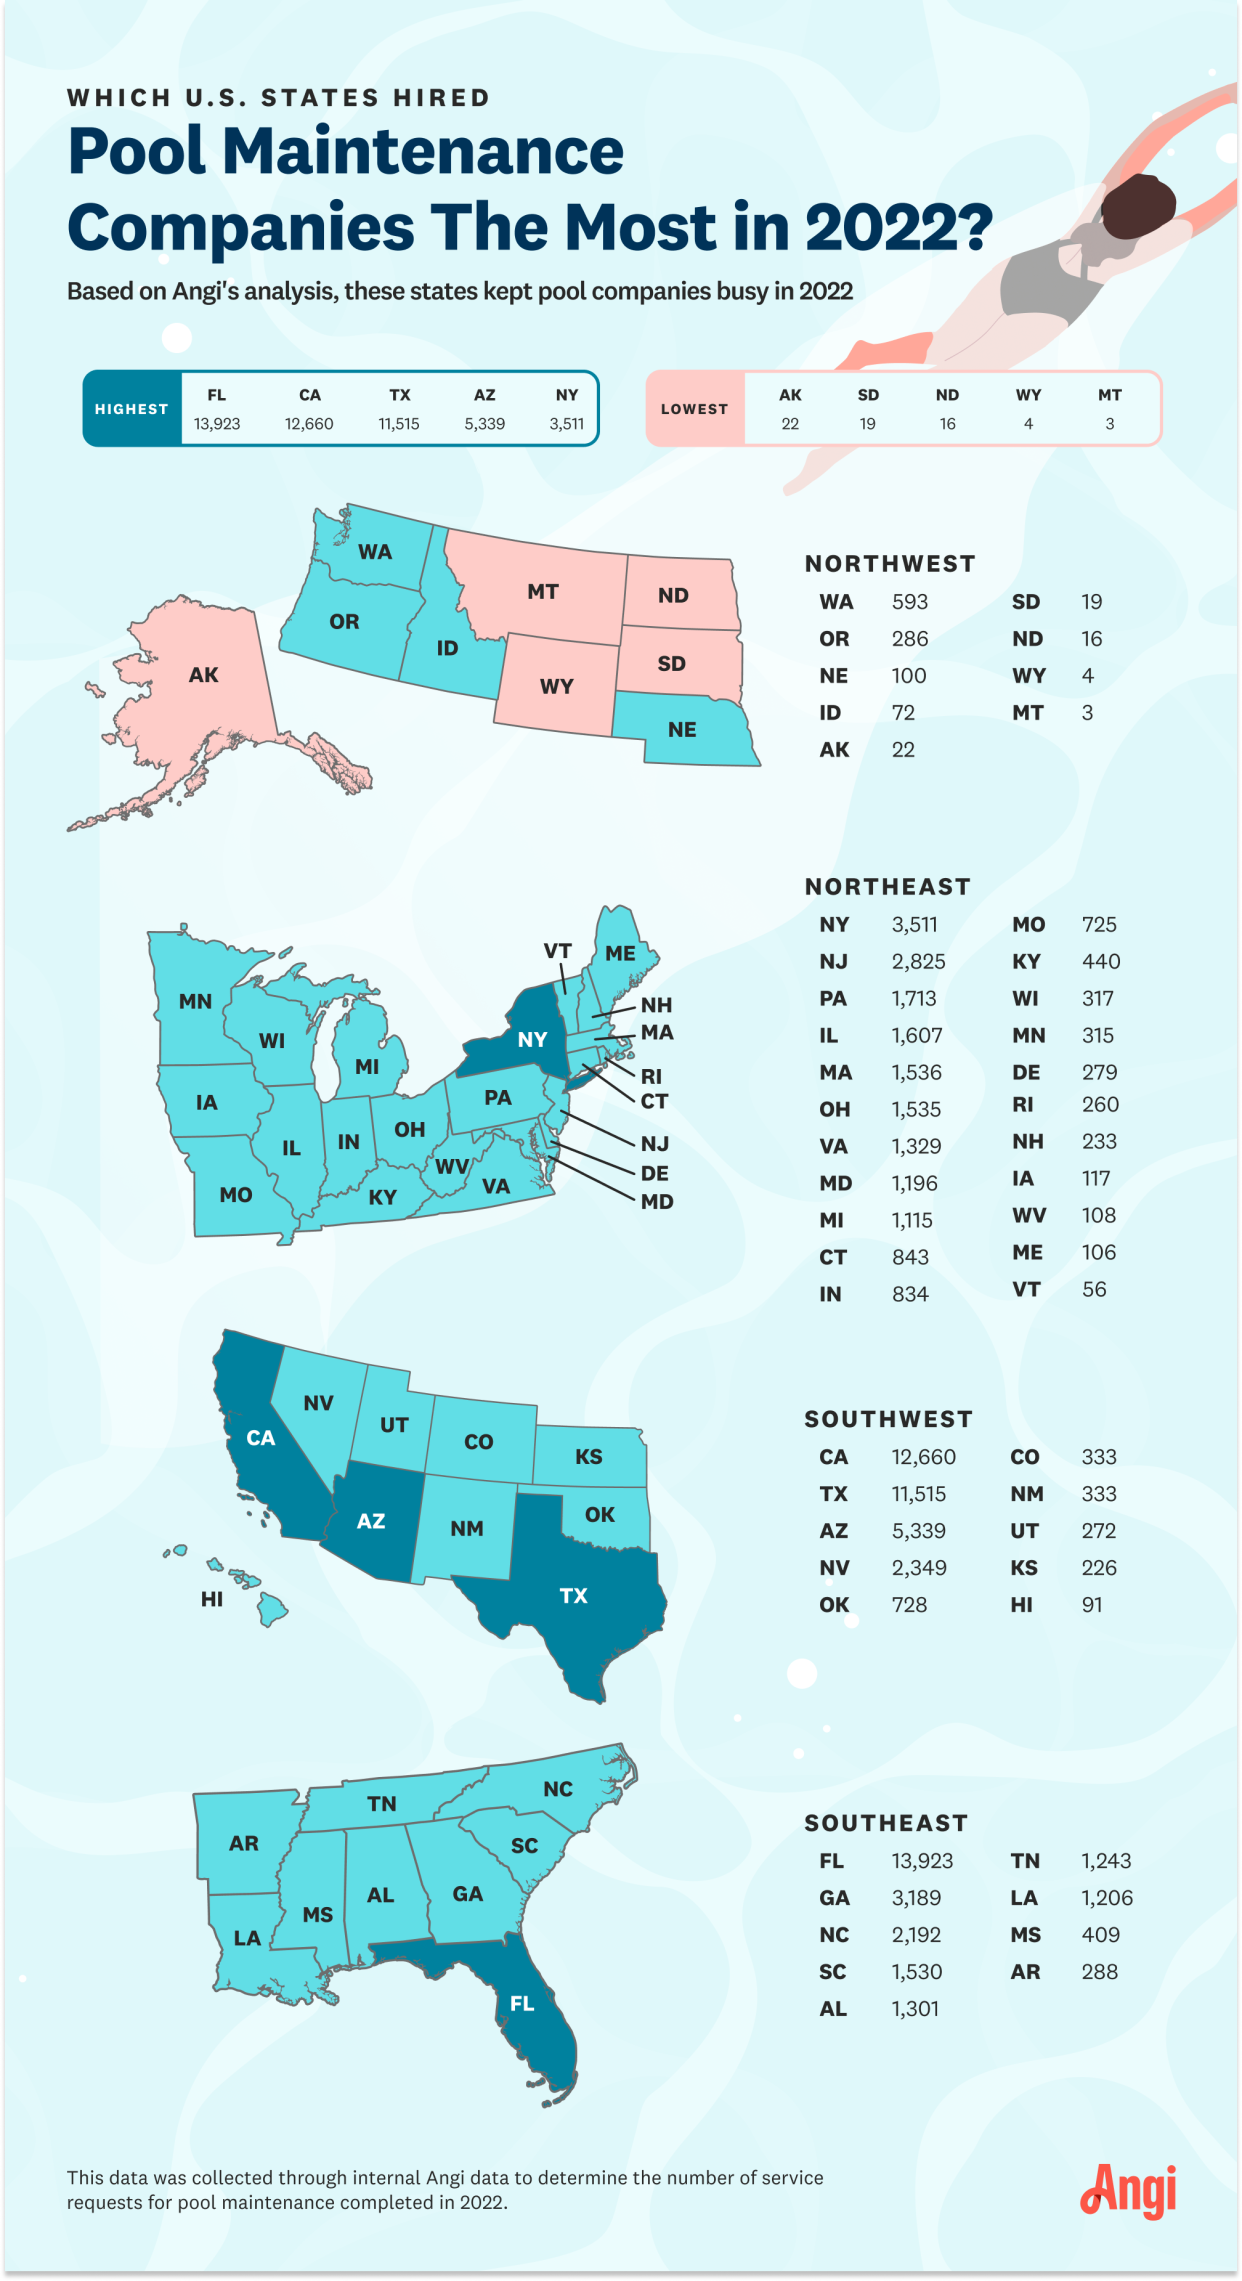 Infographic showing states with the most pool maintenance requests in 2022, with the top 5 being Florida, California, Texas, Arizona, and New York